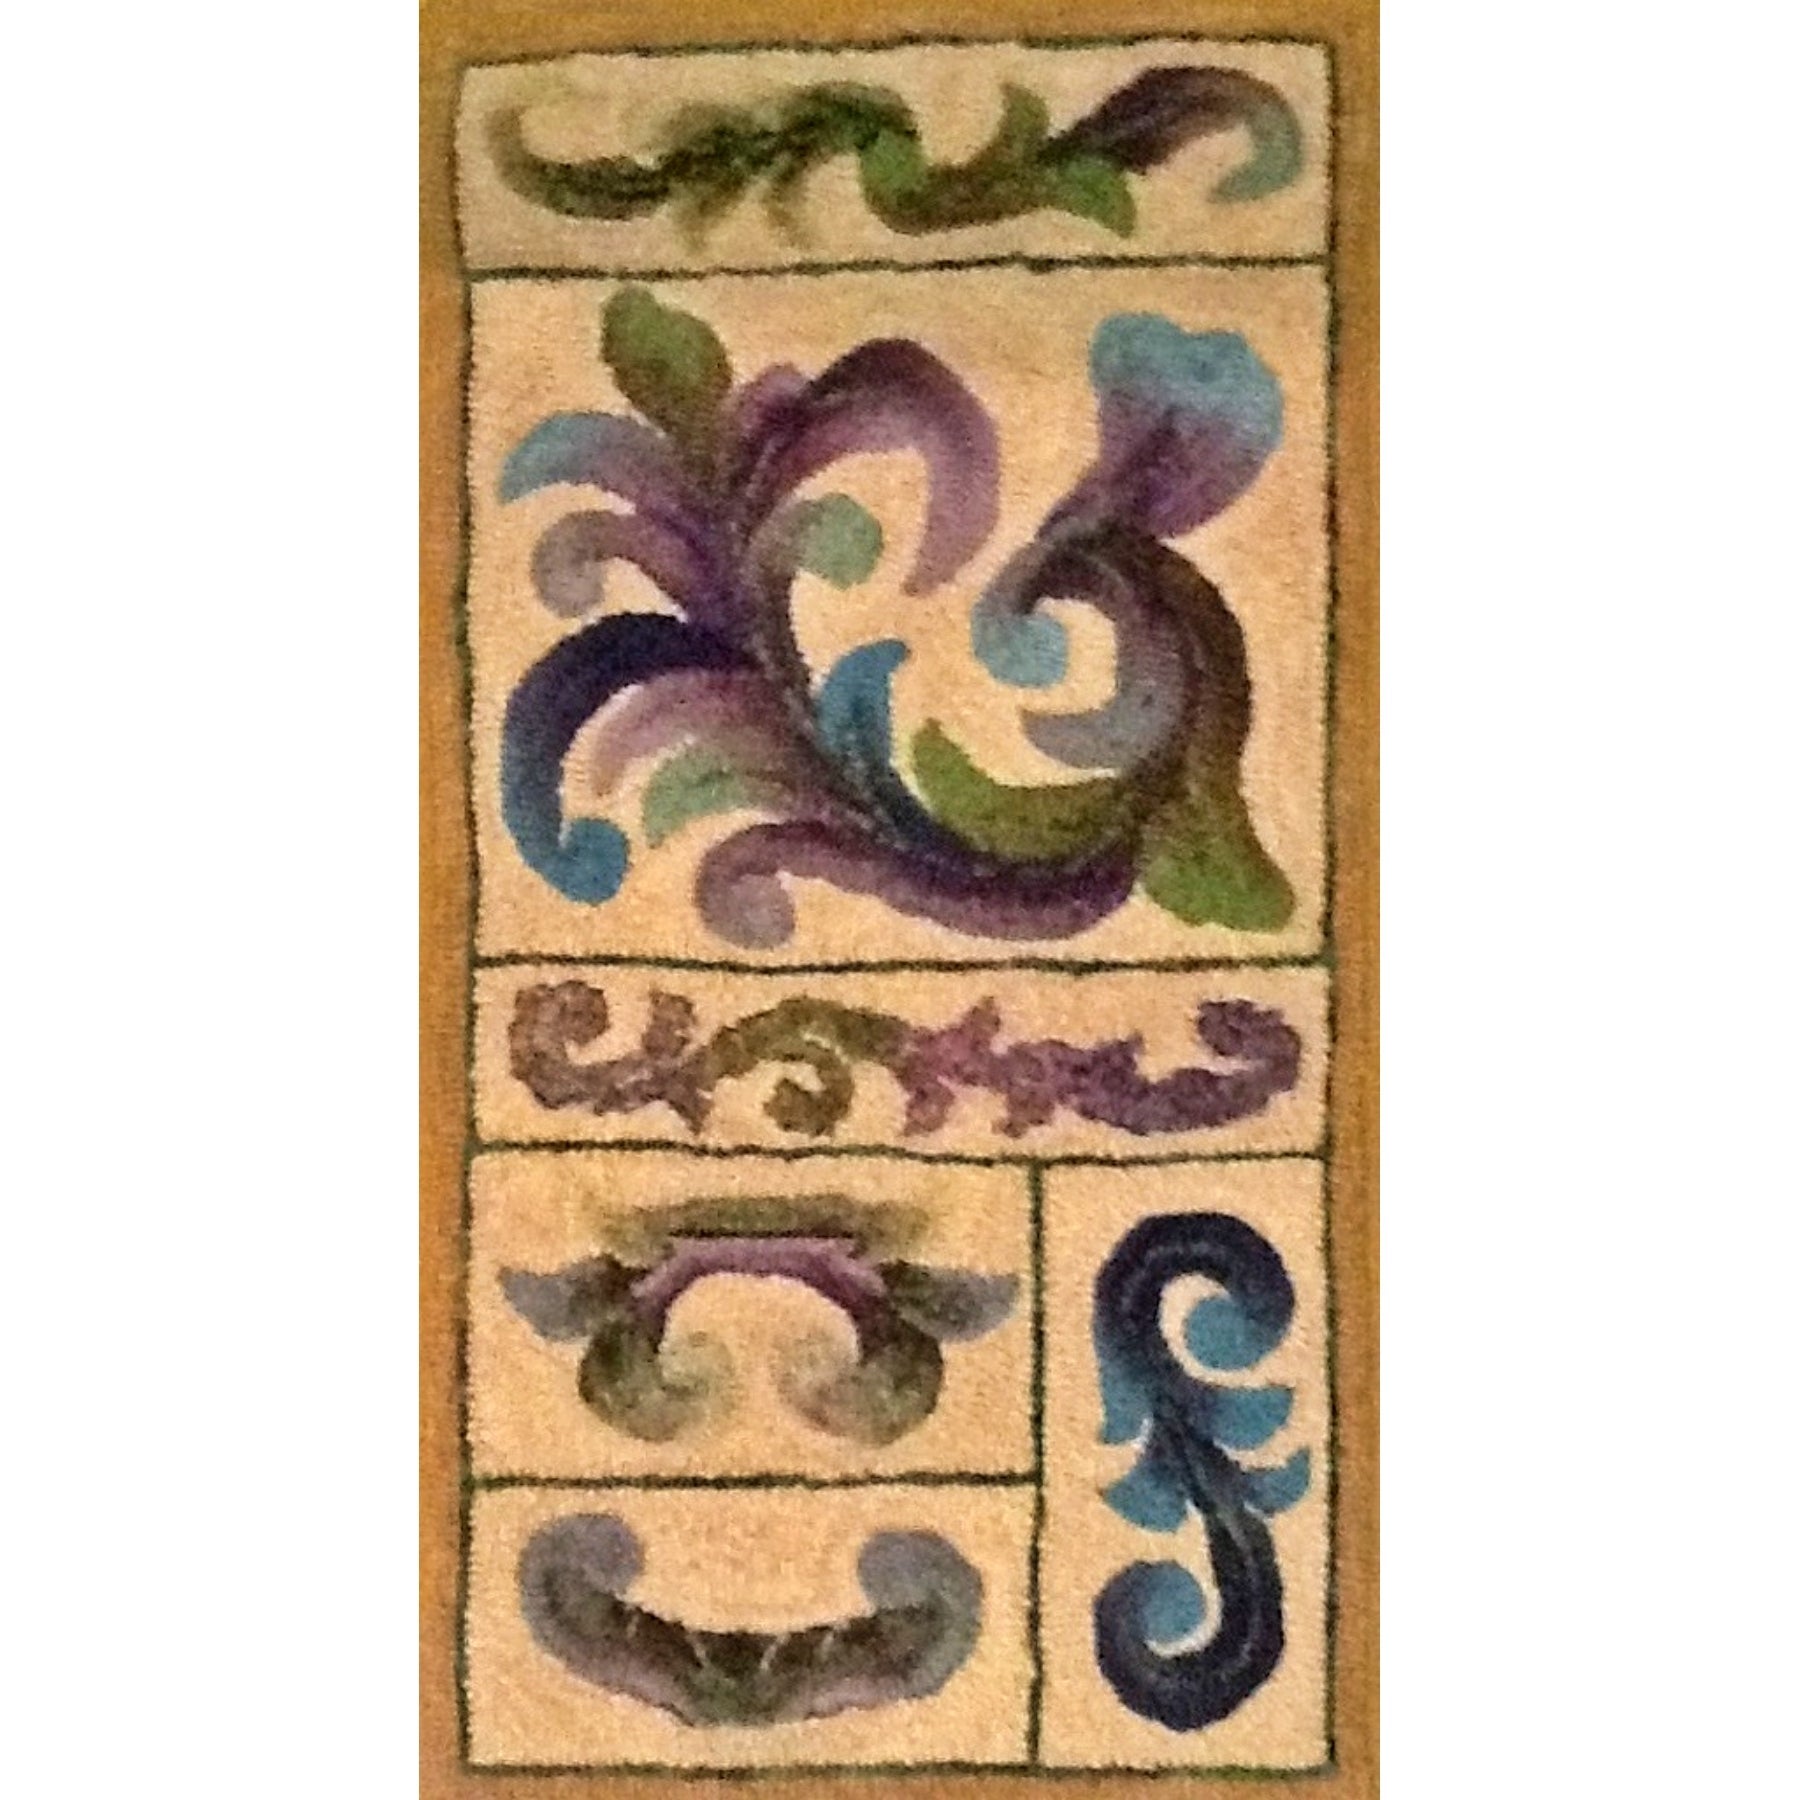 Scroll Sampler, rug hooked by Vivily Powers